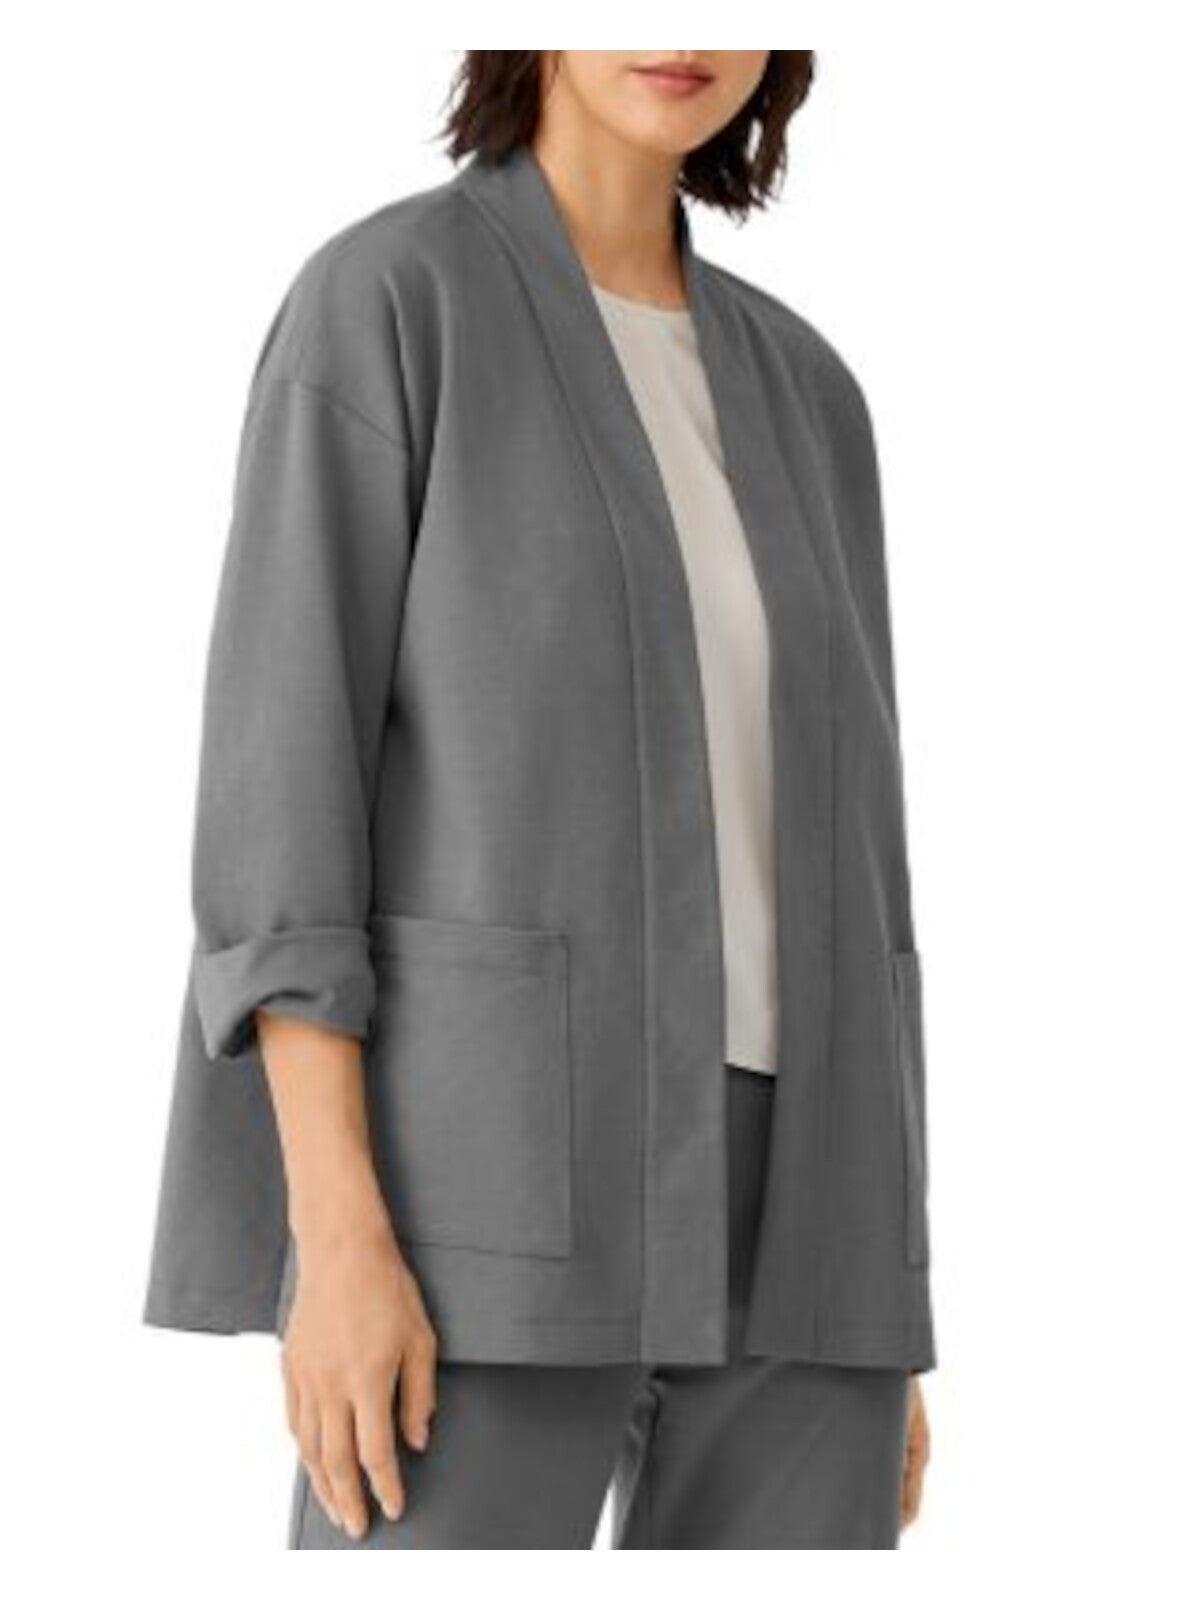 EILEEN FISHER Womens Gray Pocketed High-collar Long Sleeve Open Front Top Petites PL